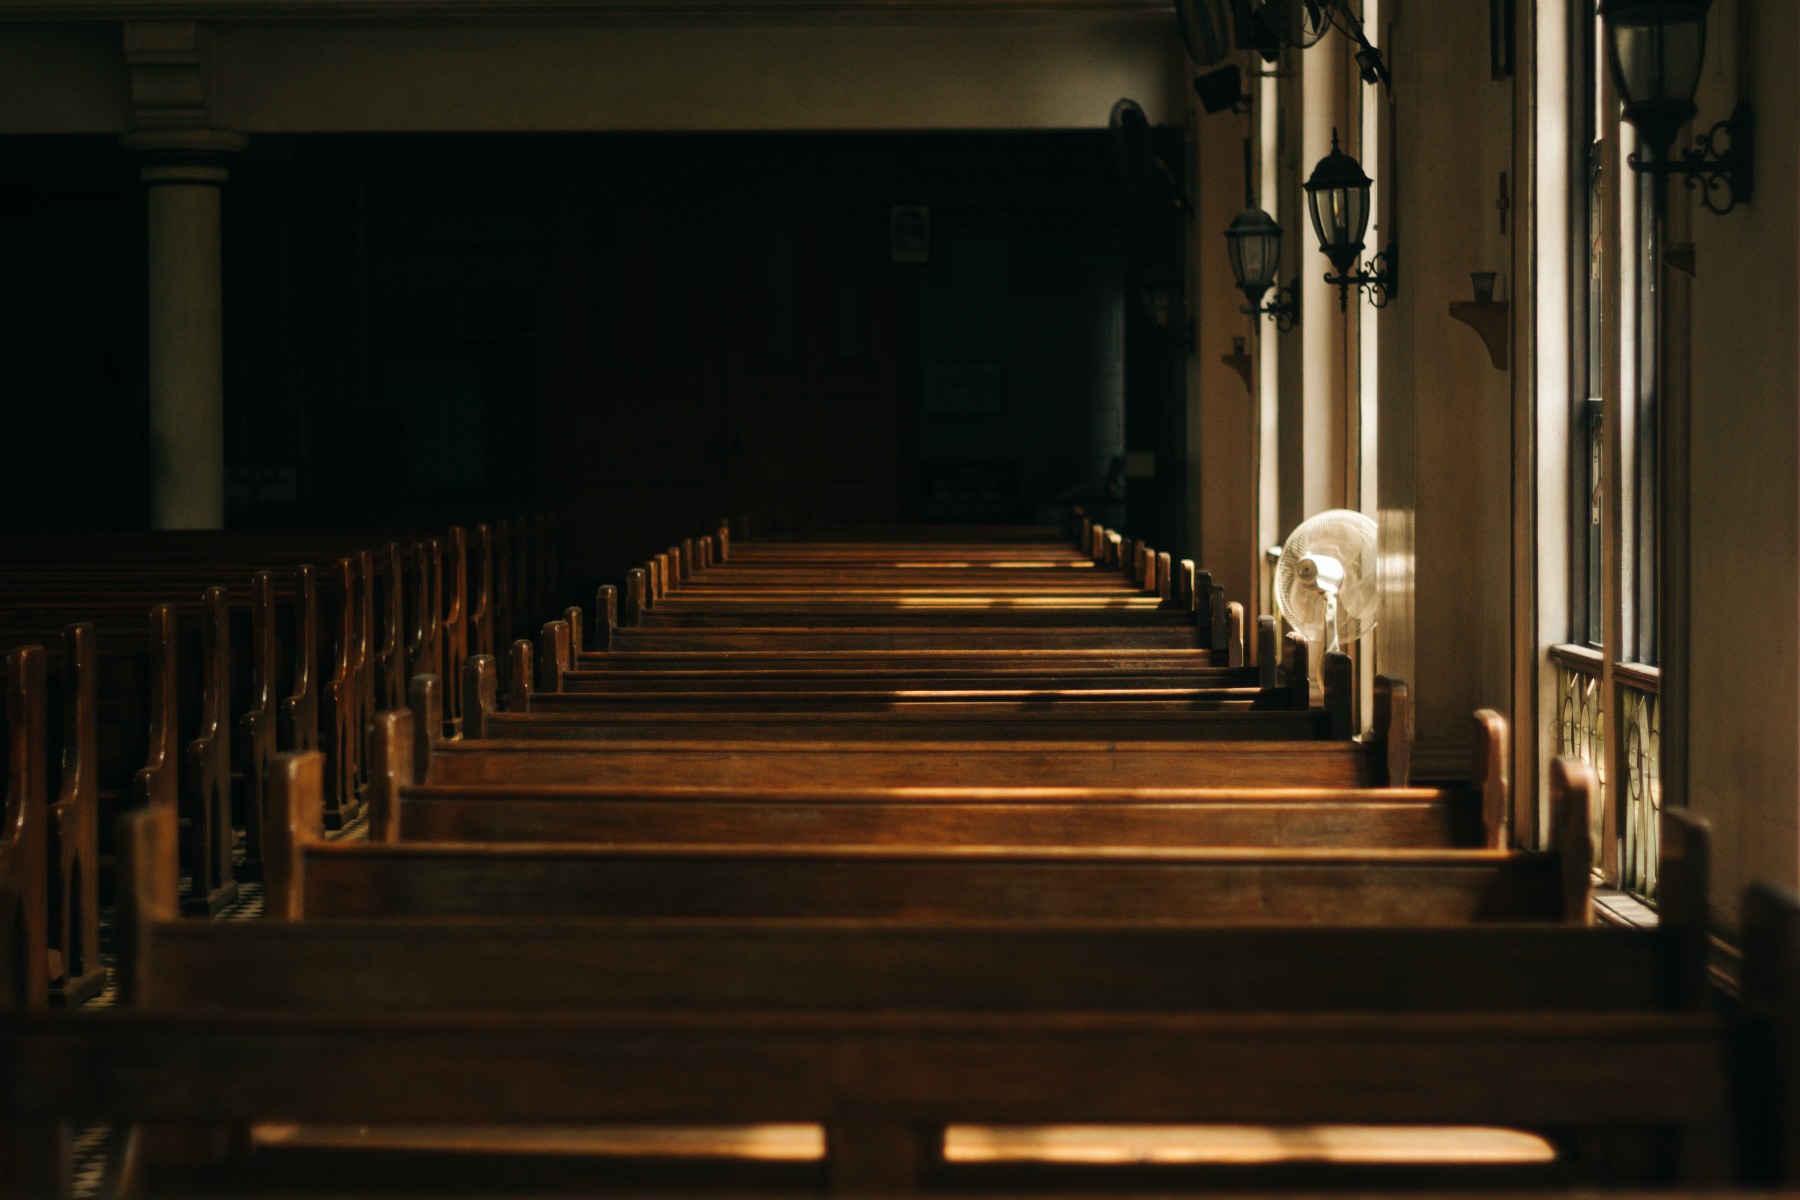 News You Can Use – 10 Things Church Members Would Love to Hear From Their Pastors